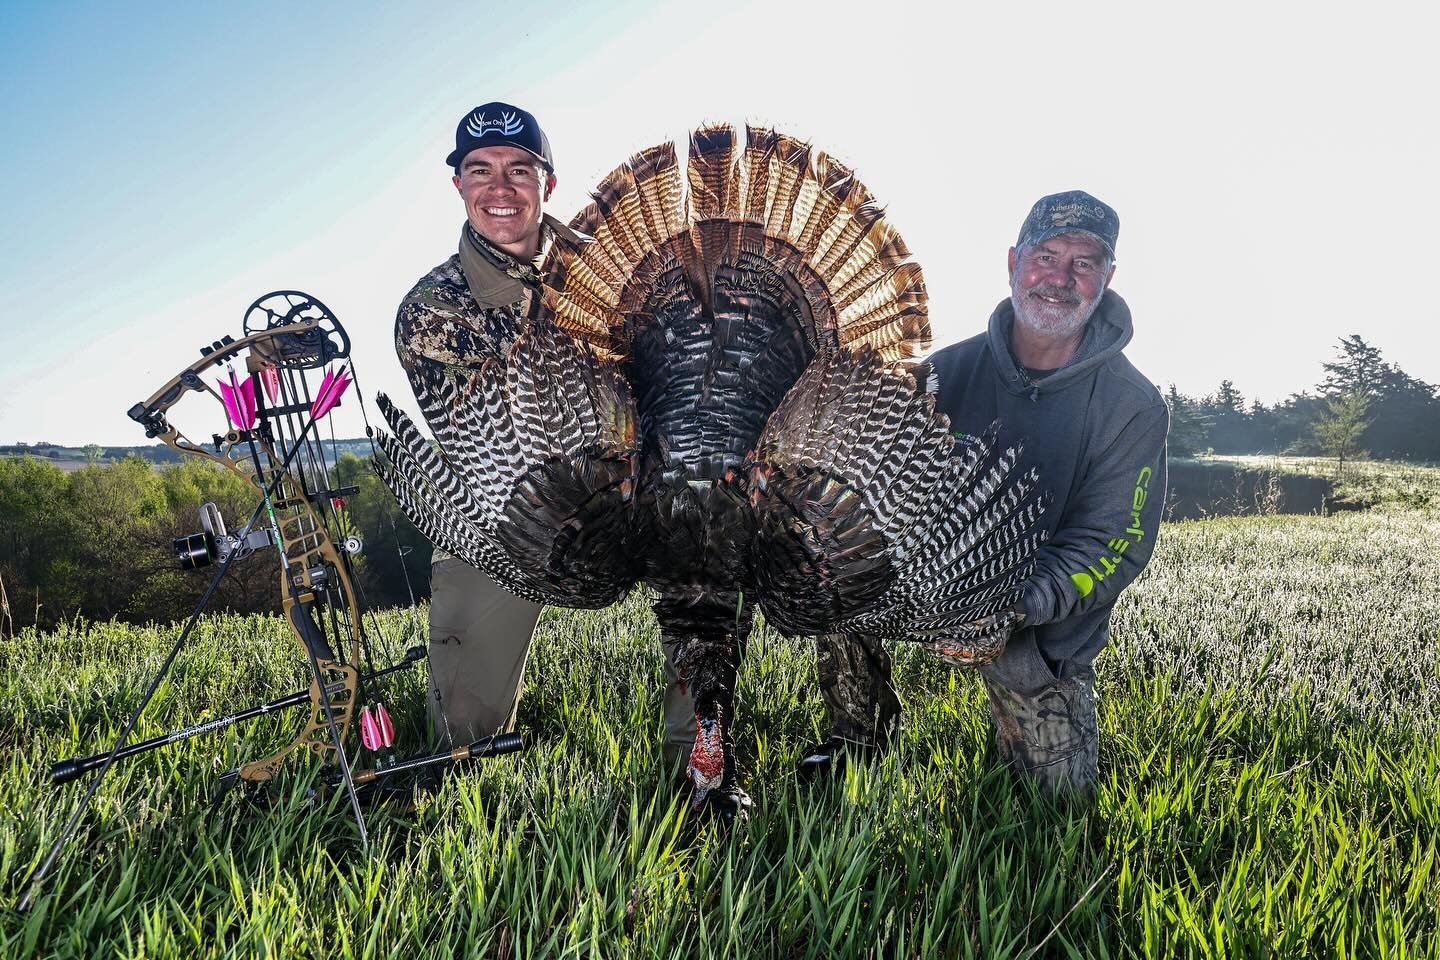 I haven&rsquo;t killed a turkey with my dad since the very first one I killed with him when I was 10 years old. Our hearts still beat just as fast as that very first one that did it right 16 years ago, and I pray it never goes away. Taking my fianc&e